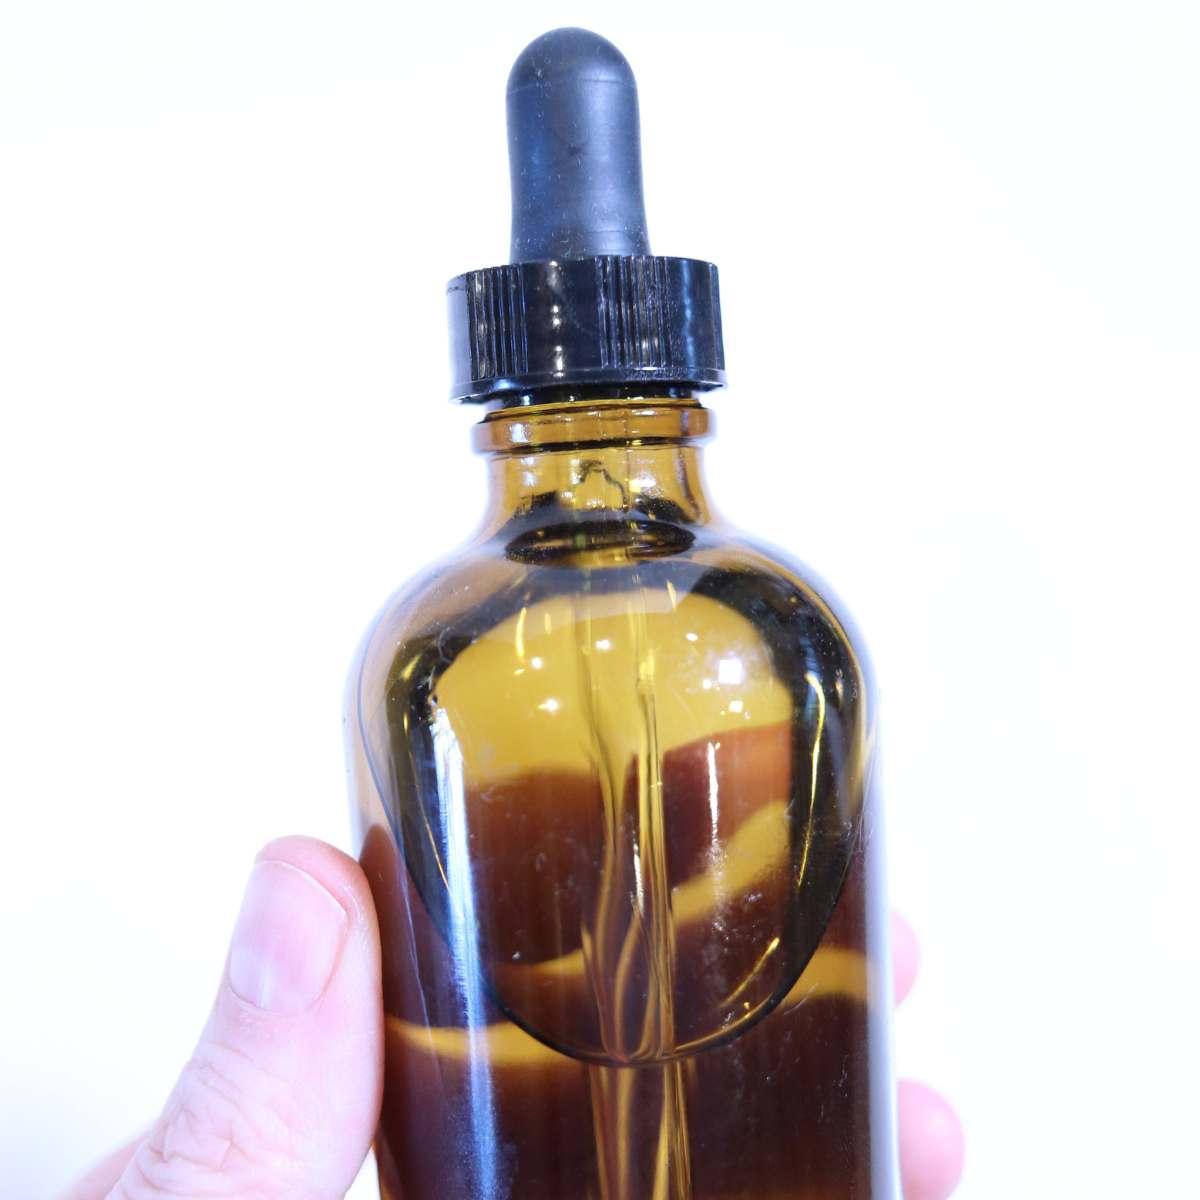 An amber glass bottle with dropper inside full of organic vitamin E oil for DIY skin and beauty recipes.